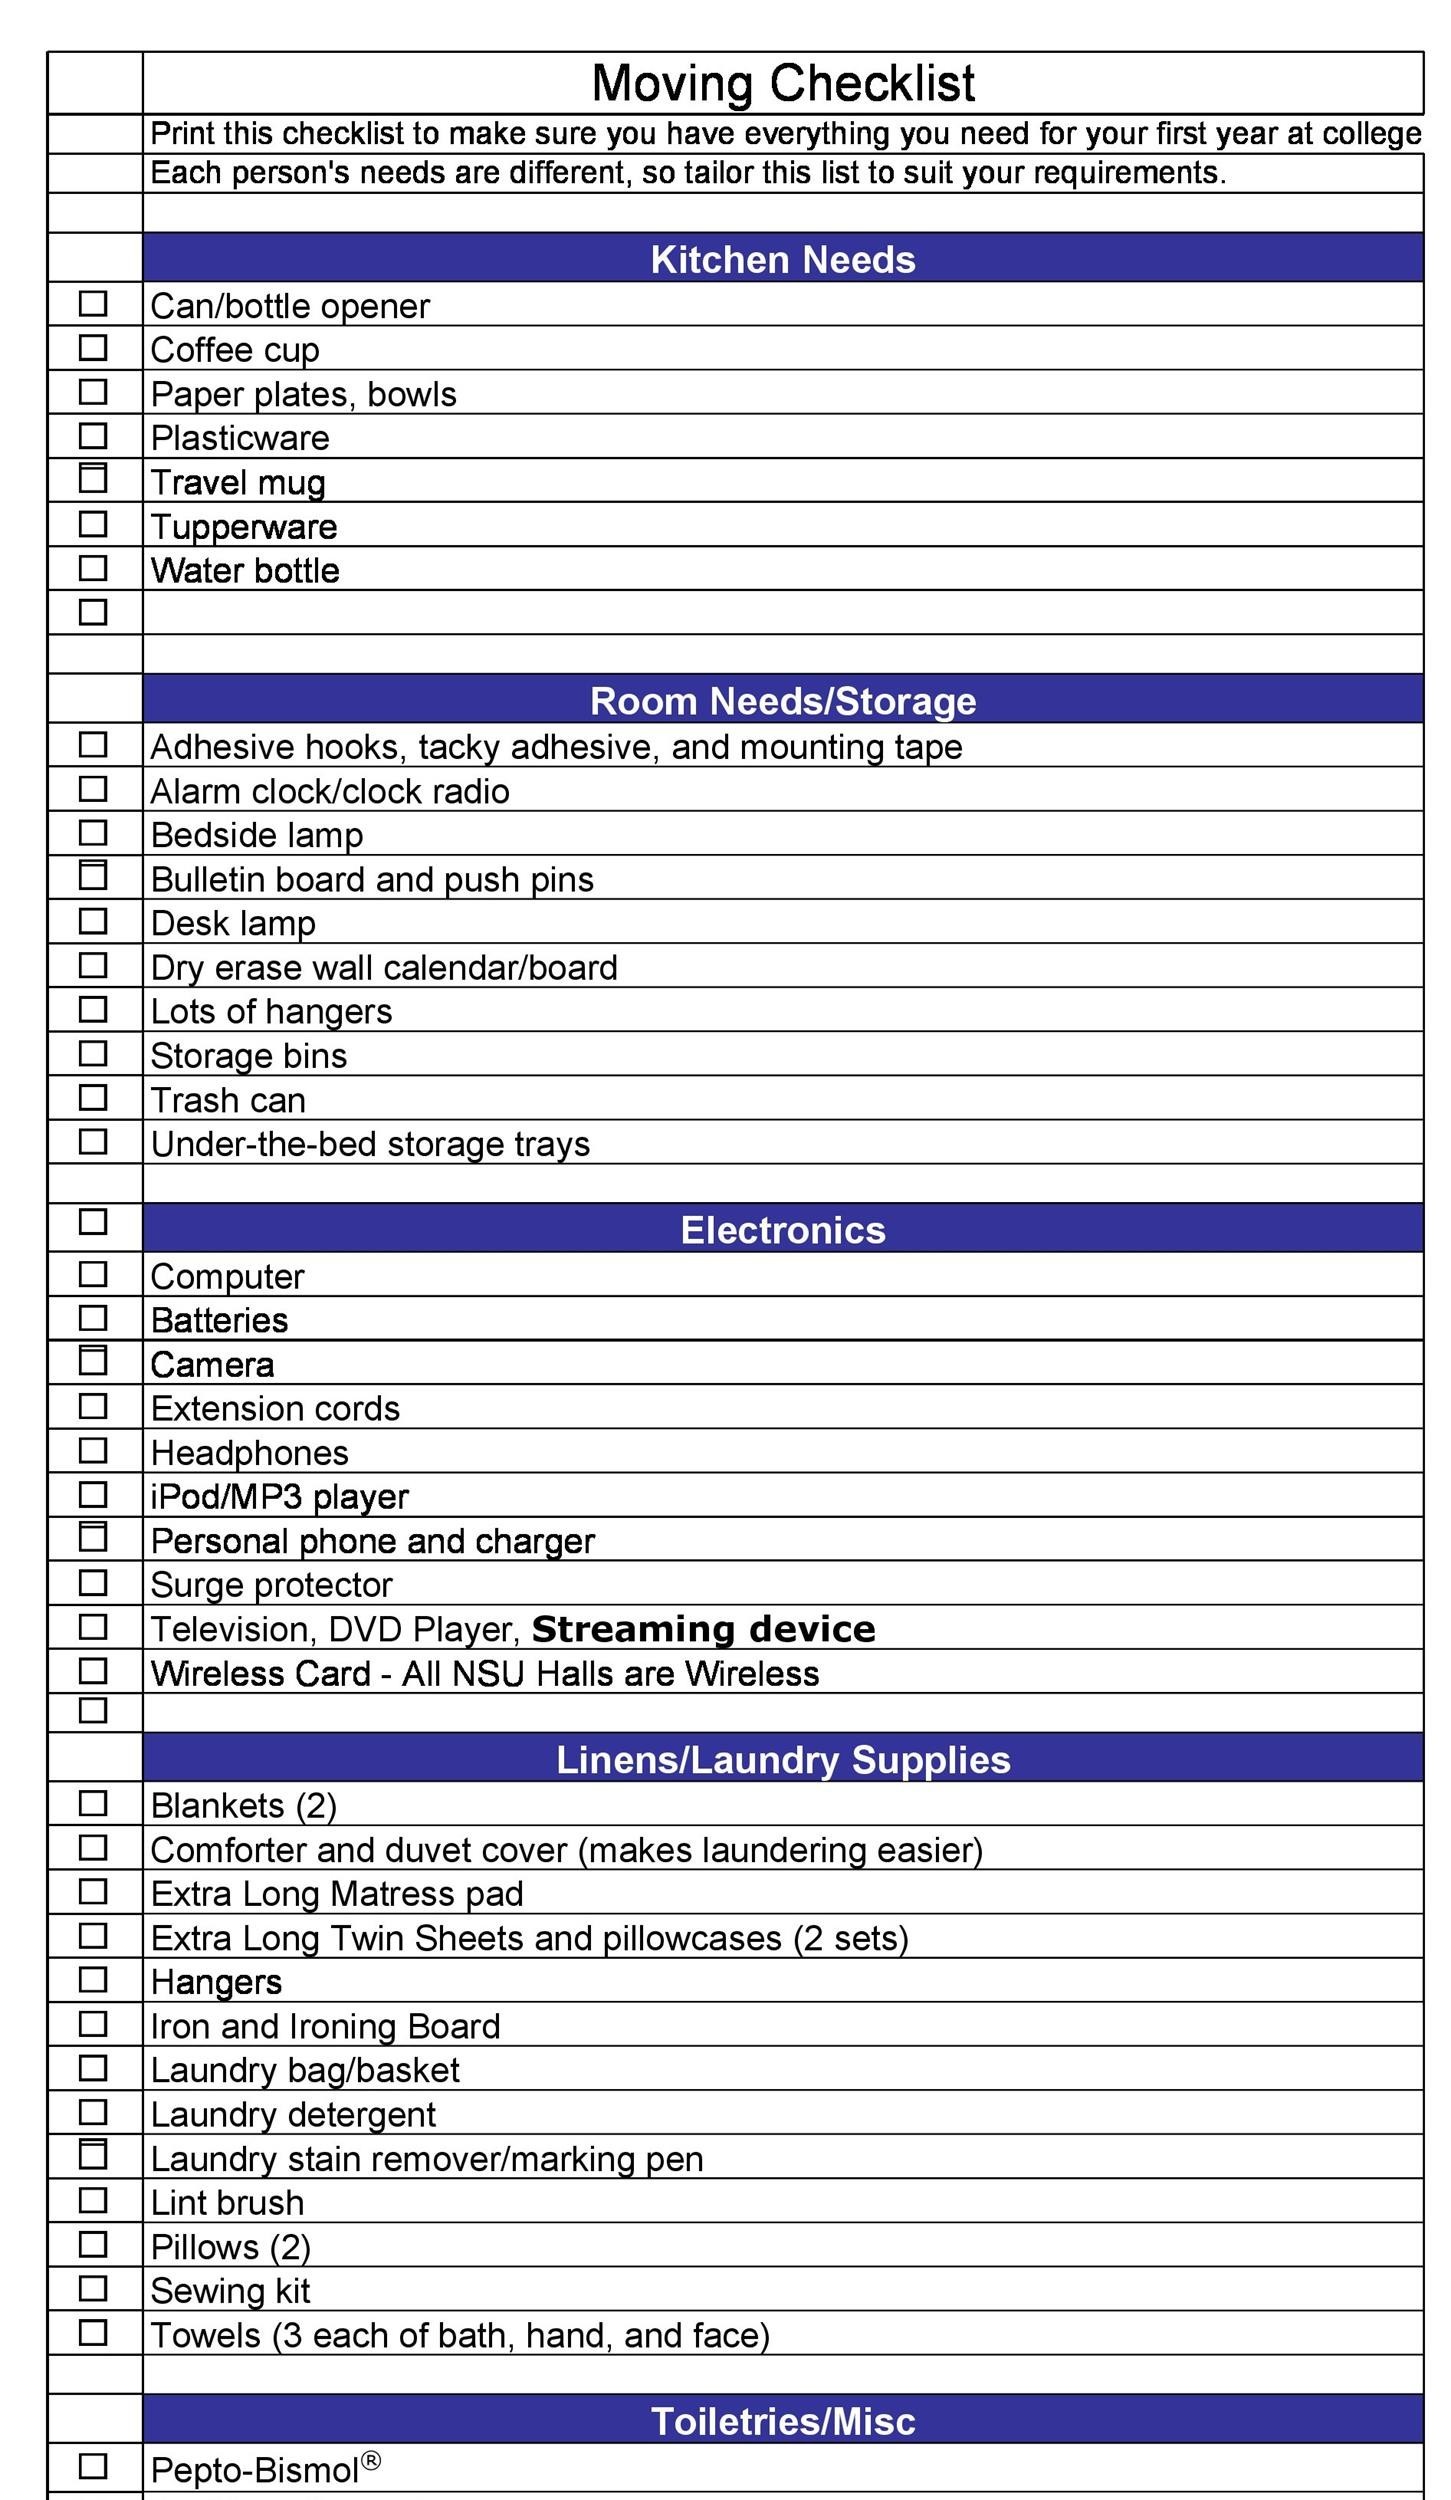 45 Great Moving Checklists Checklist for Moving In / Out ᐅ TemplateLab